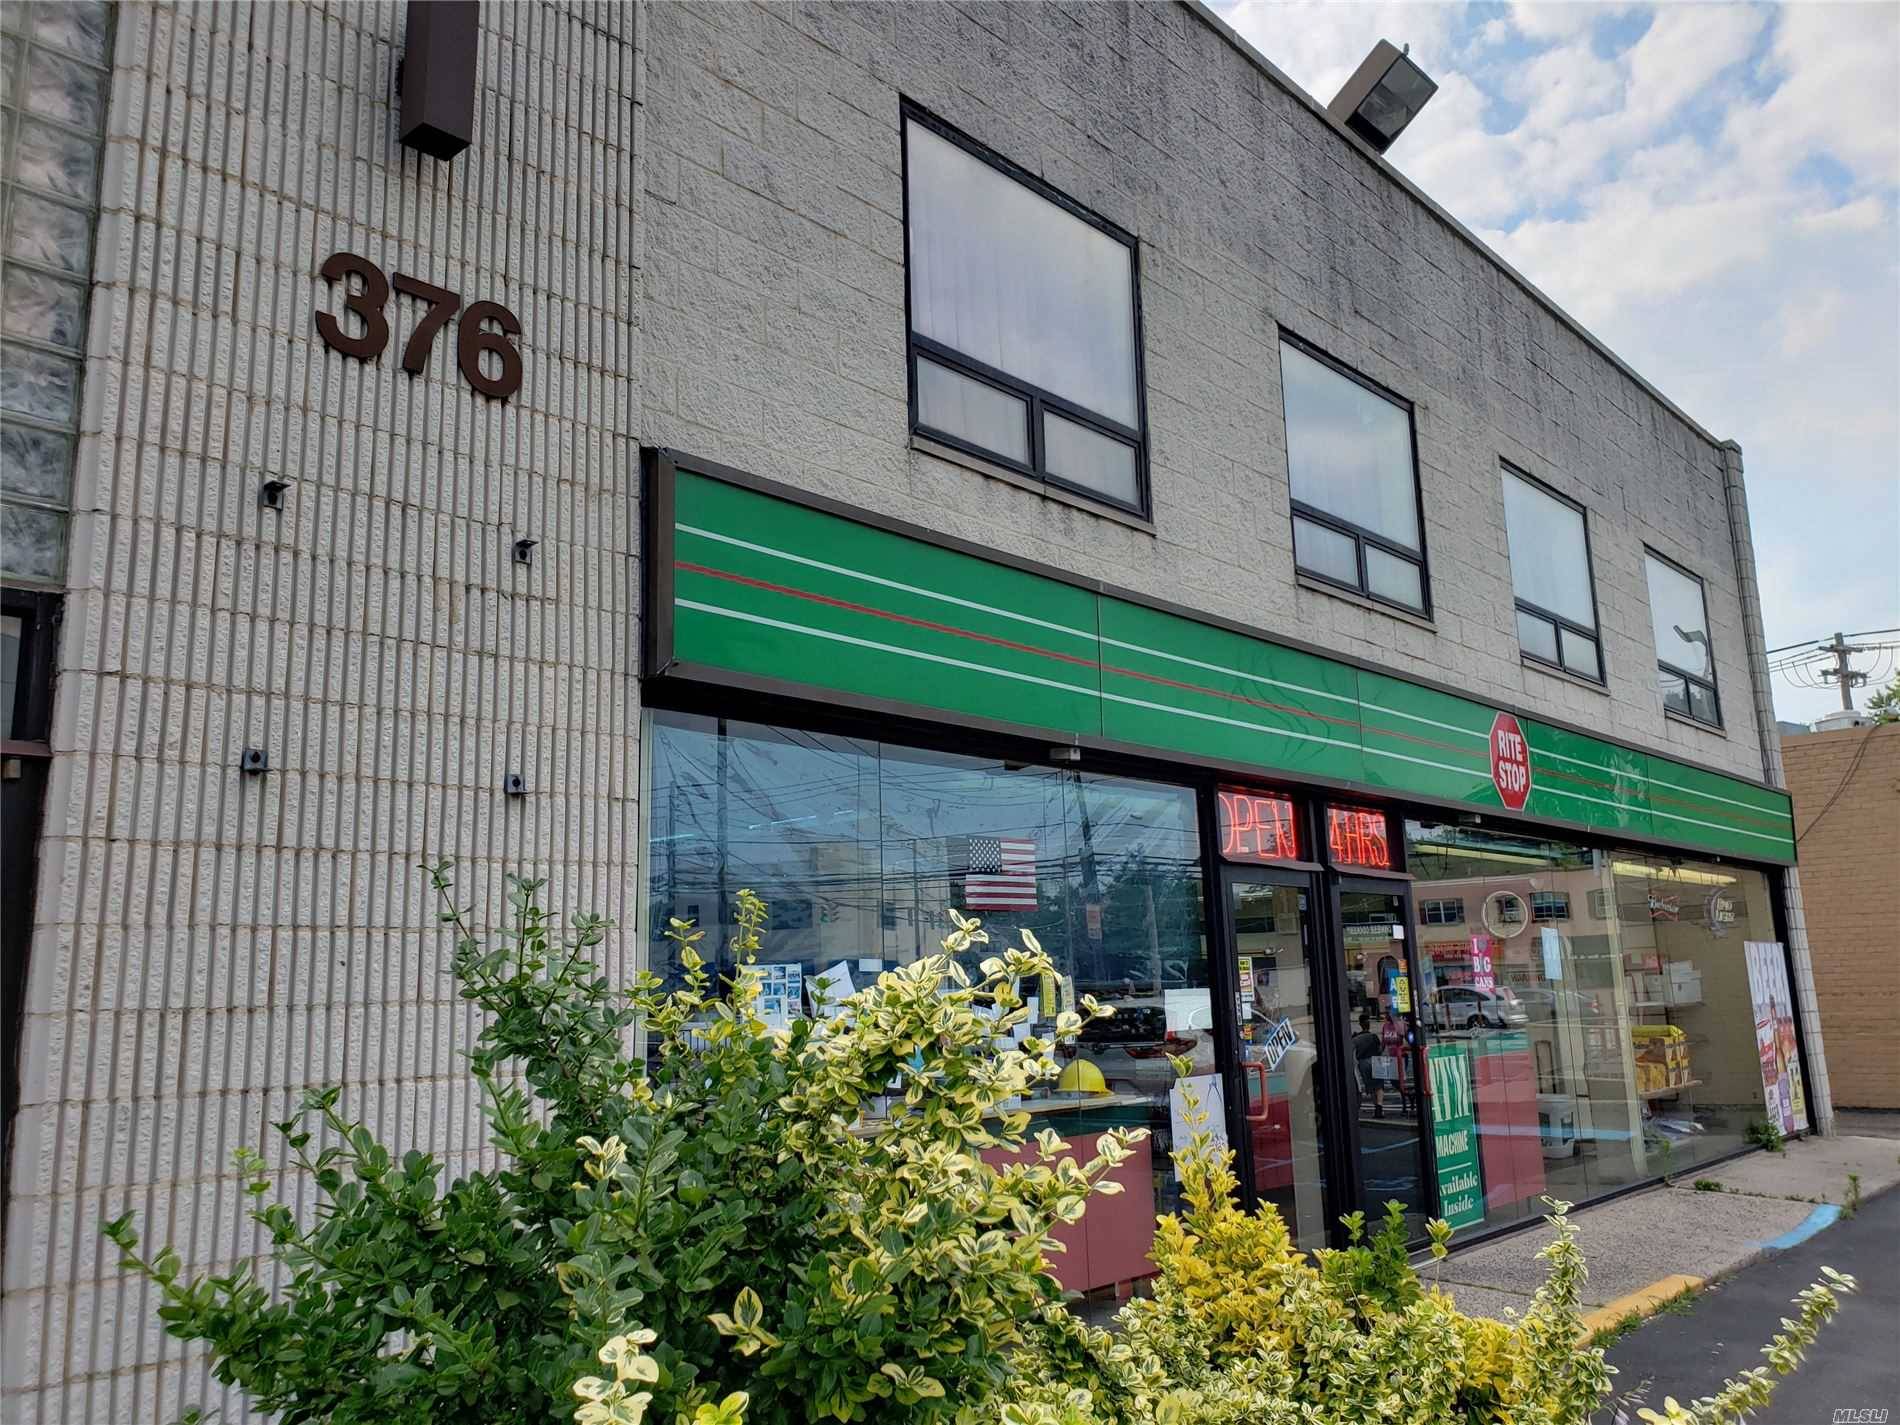 Incredible opportunity to own a thriving convenience store business in a very high traffic pattern at the cross road of Bayview Ave and Atlantic Ave in Freeport.